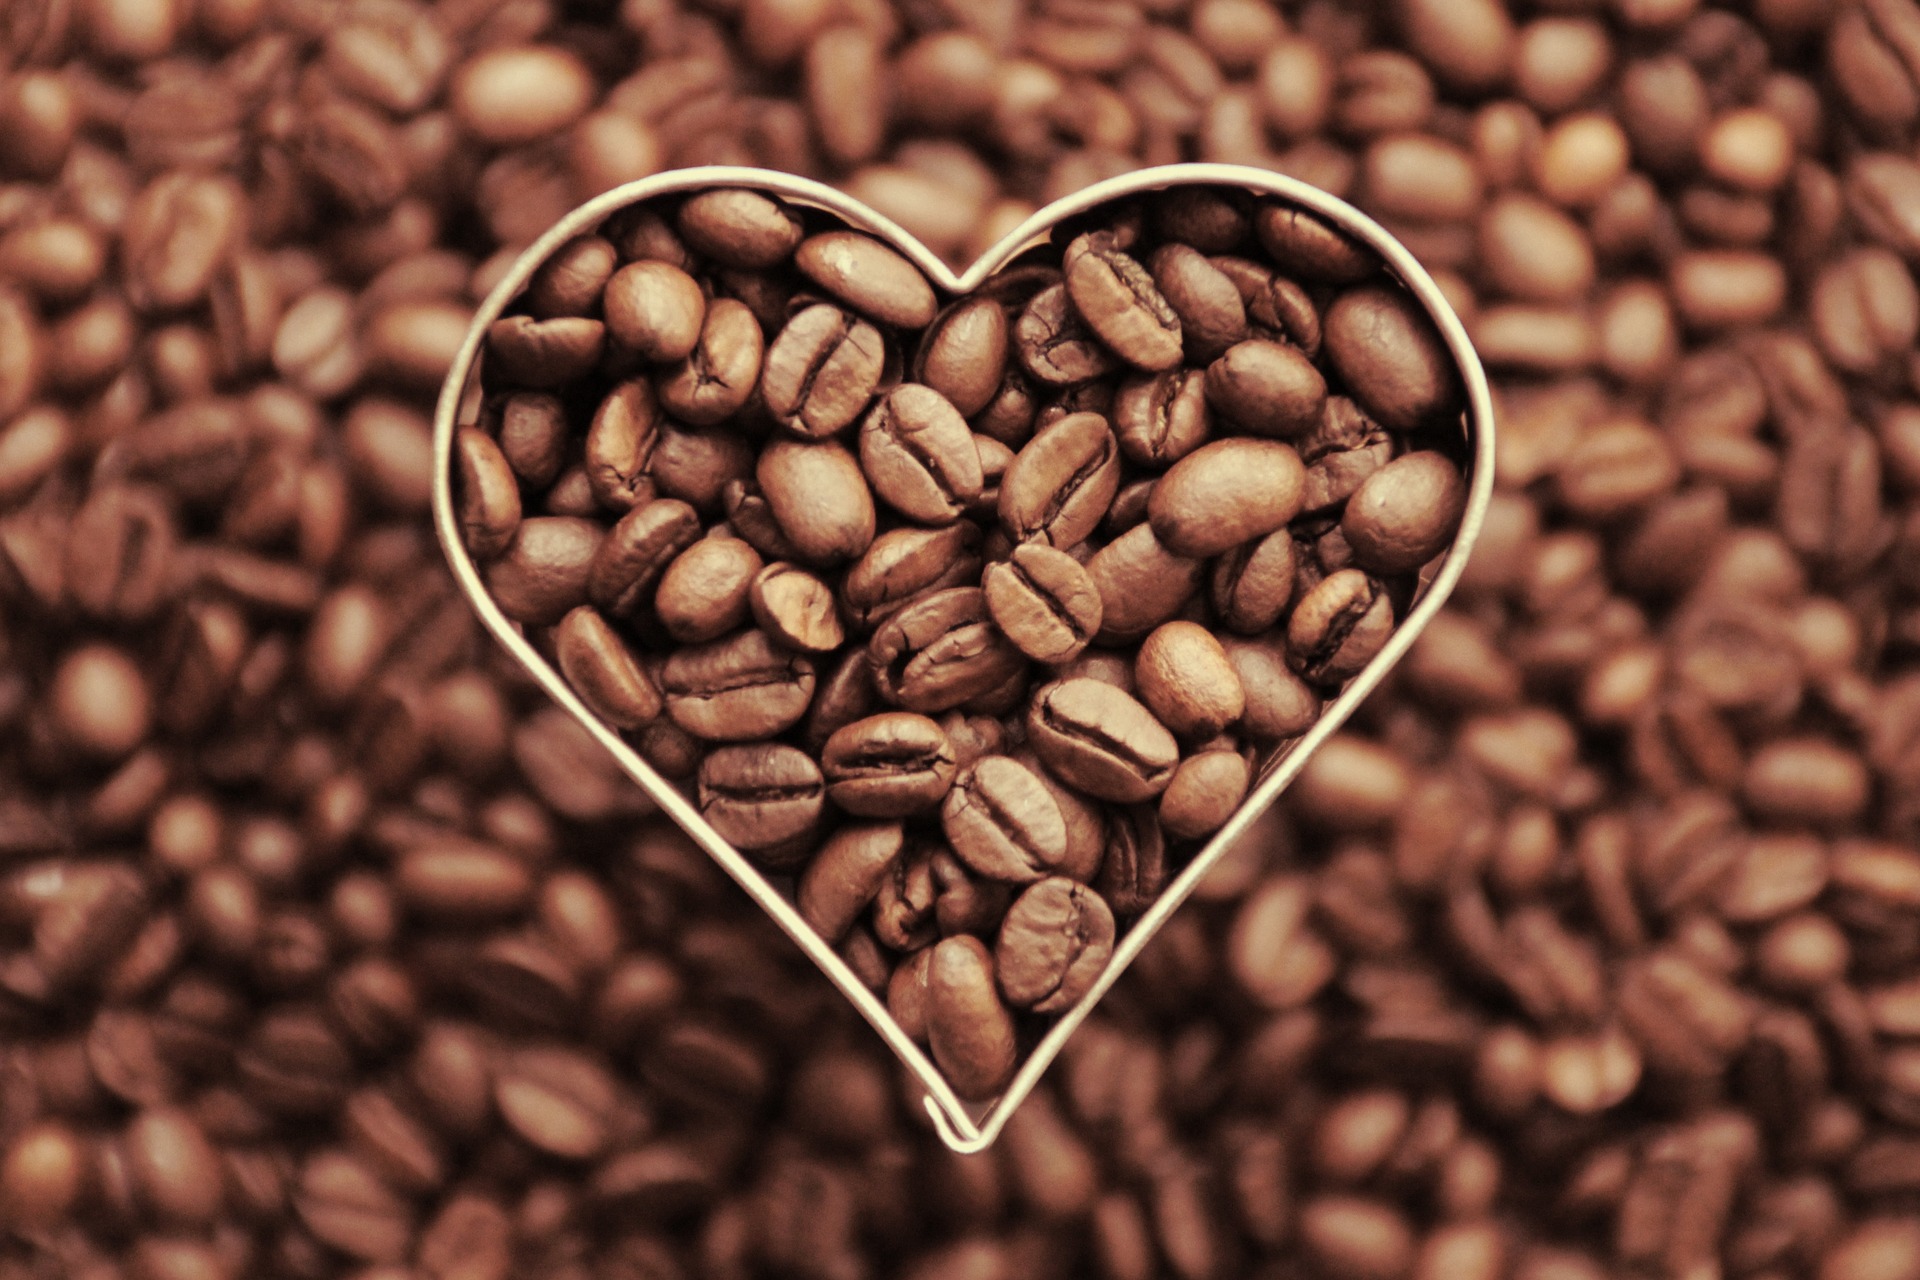 Savory moments of Coffee beans